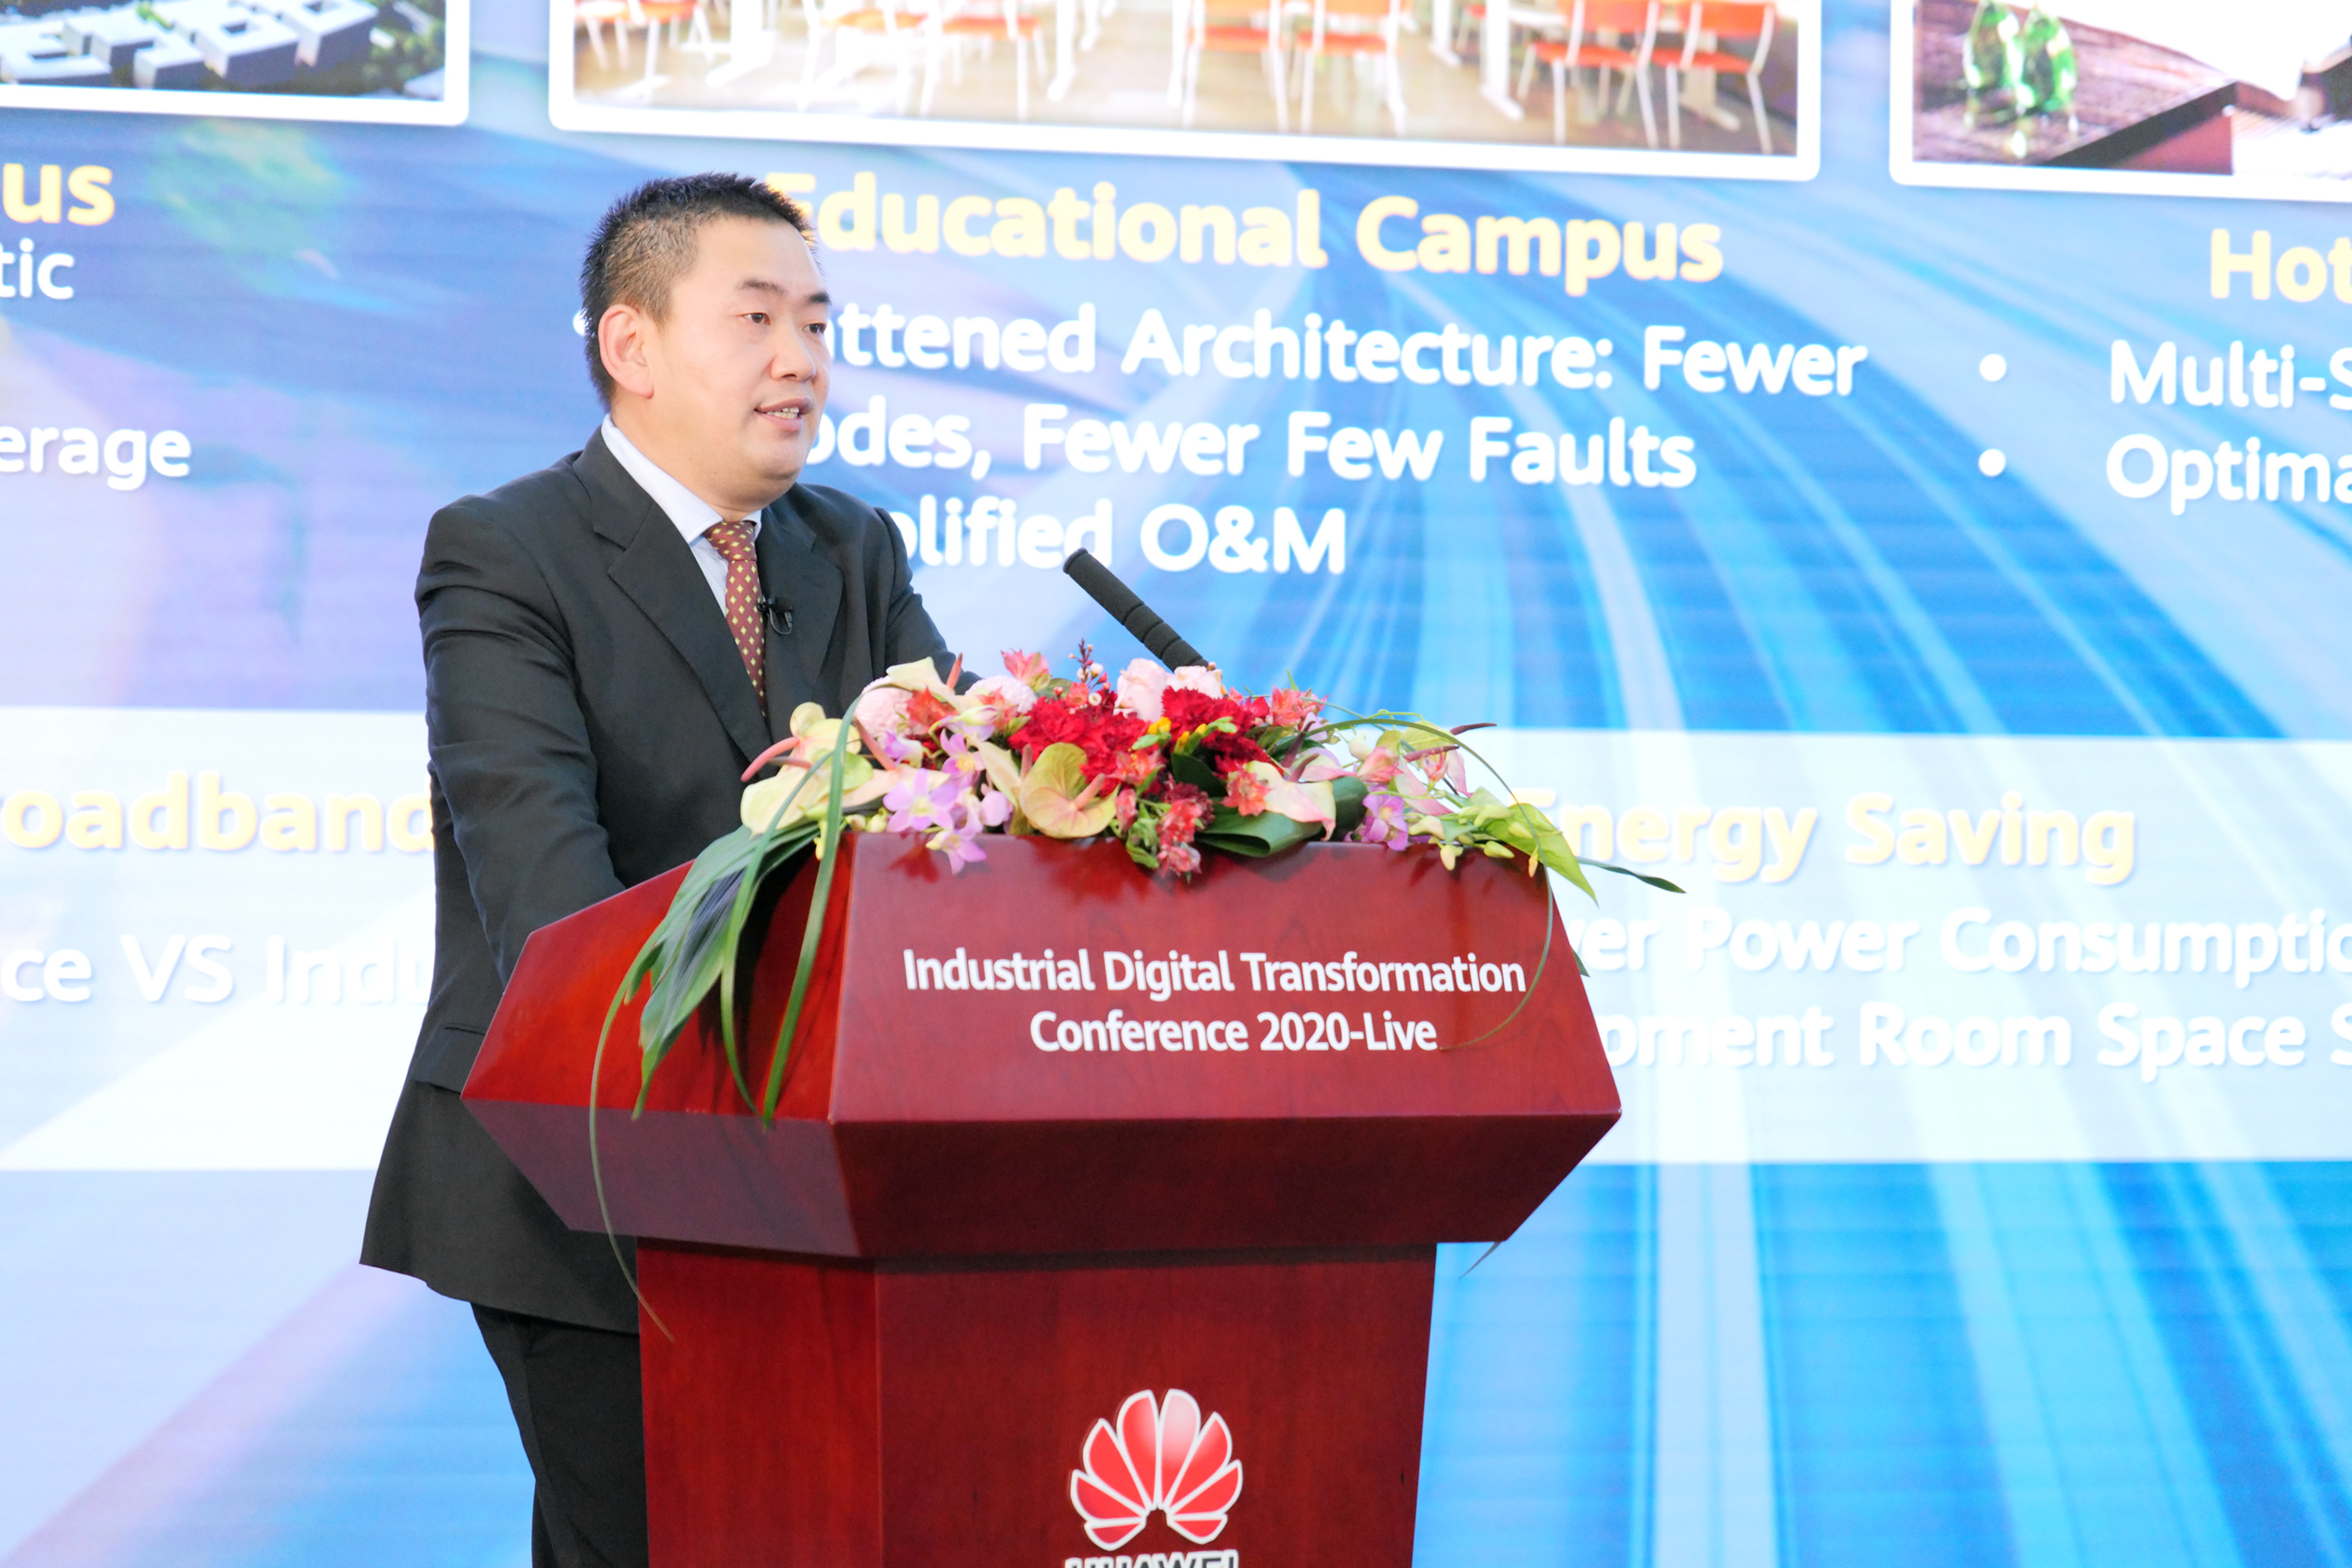 Sun Fuyou, Vice President of Huawei Enterprise BG, presents at the Industrial Digital Transformation Conference 2020